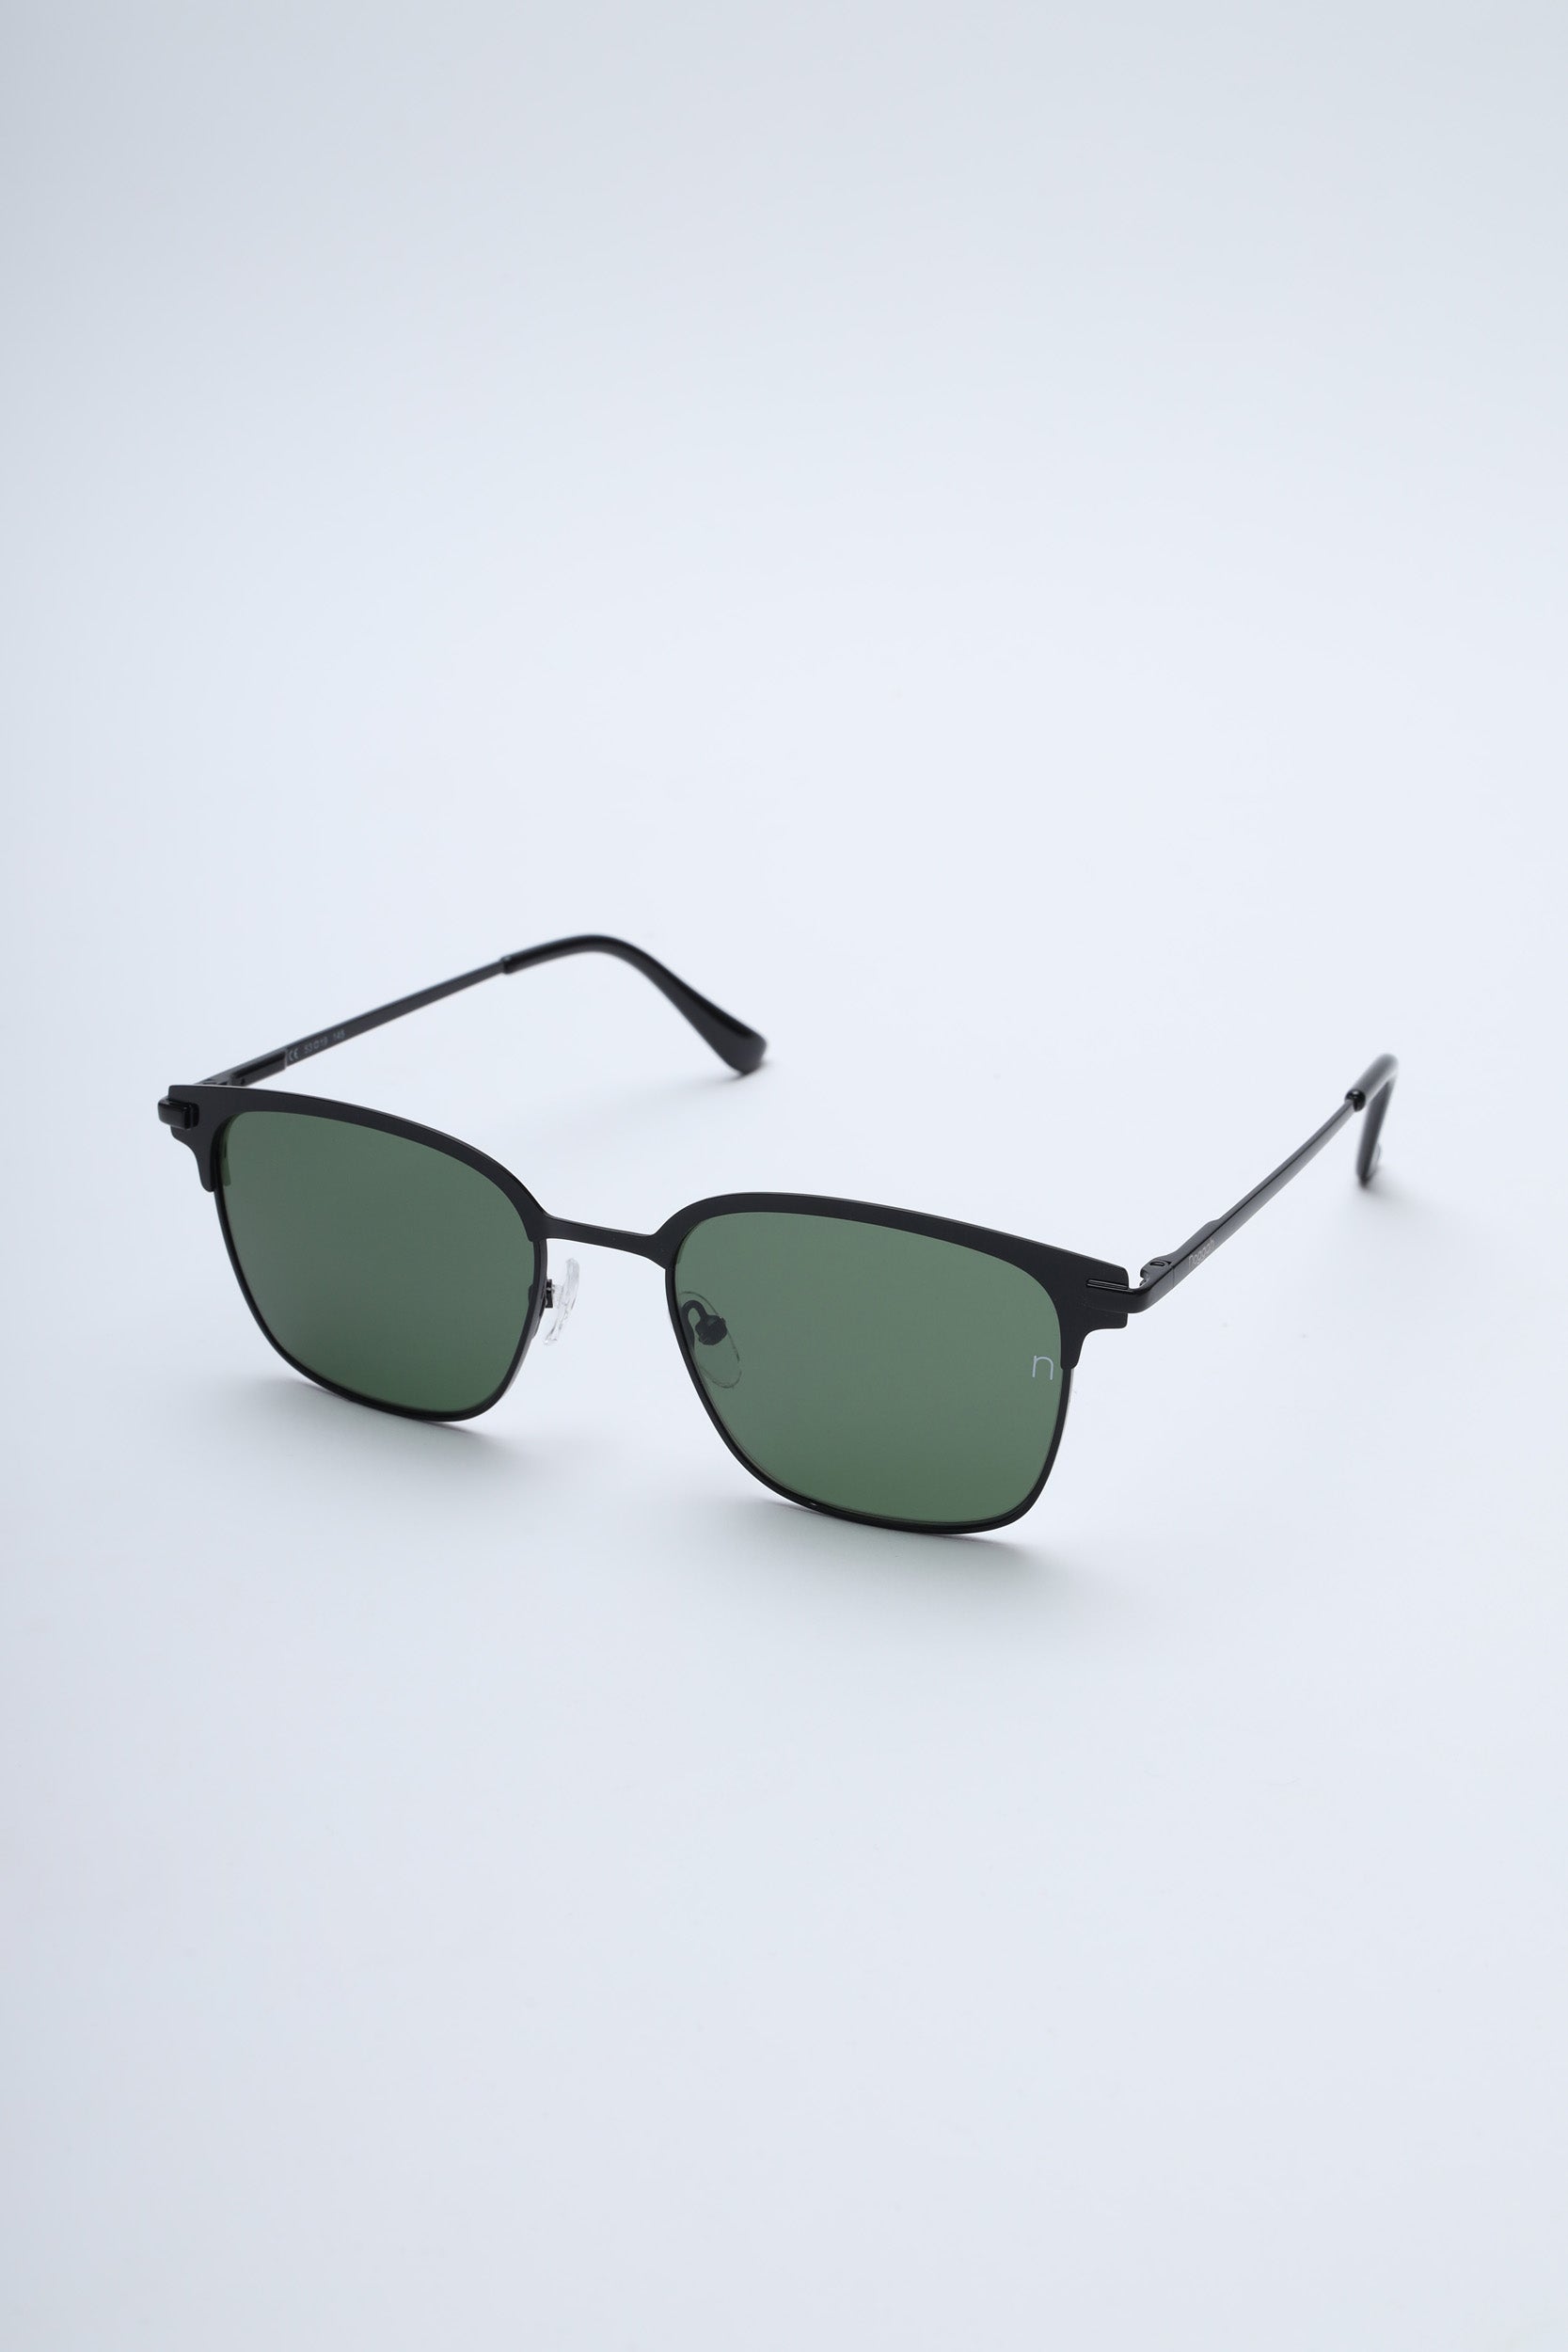 NS2004GFGL Stainless Steel Gold Frame with Green Glass Lens Sunglasses